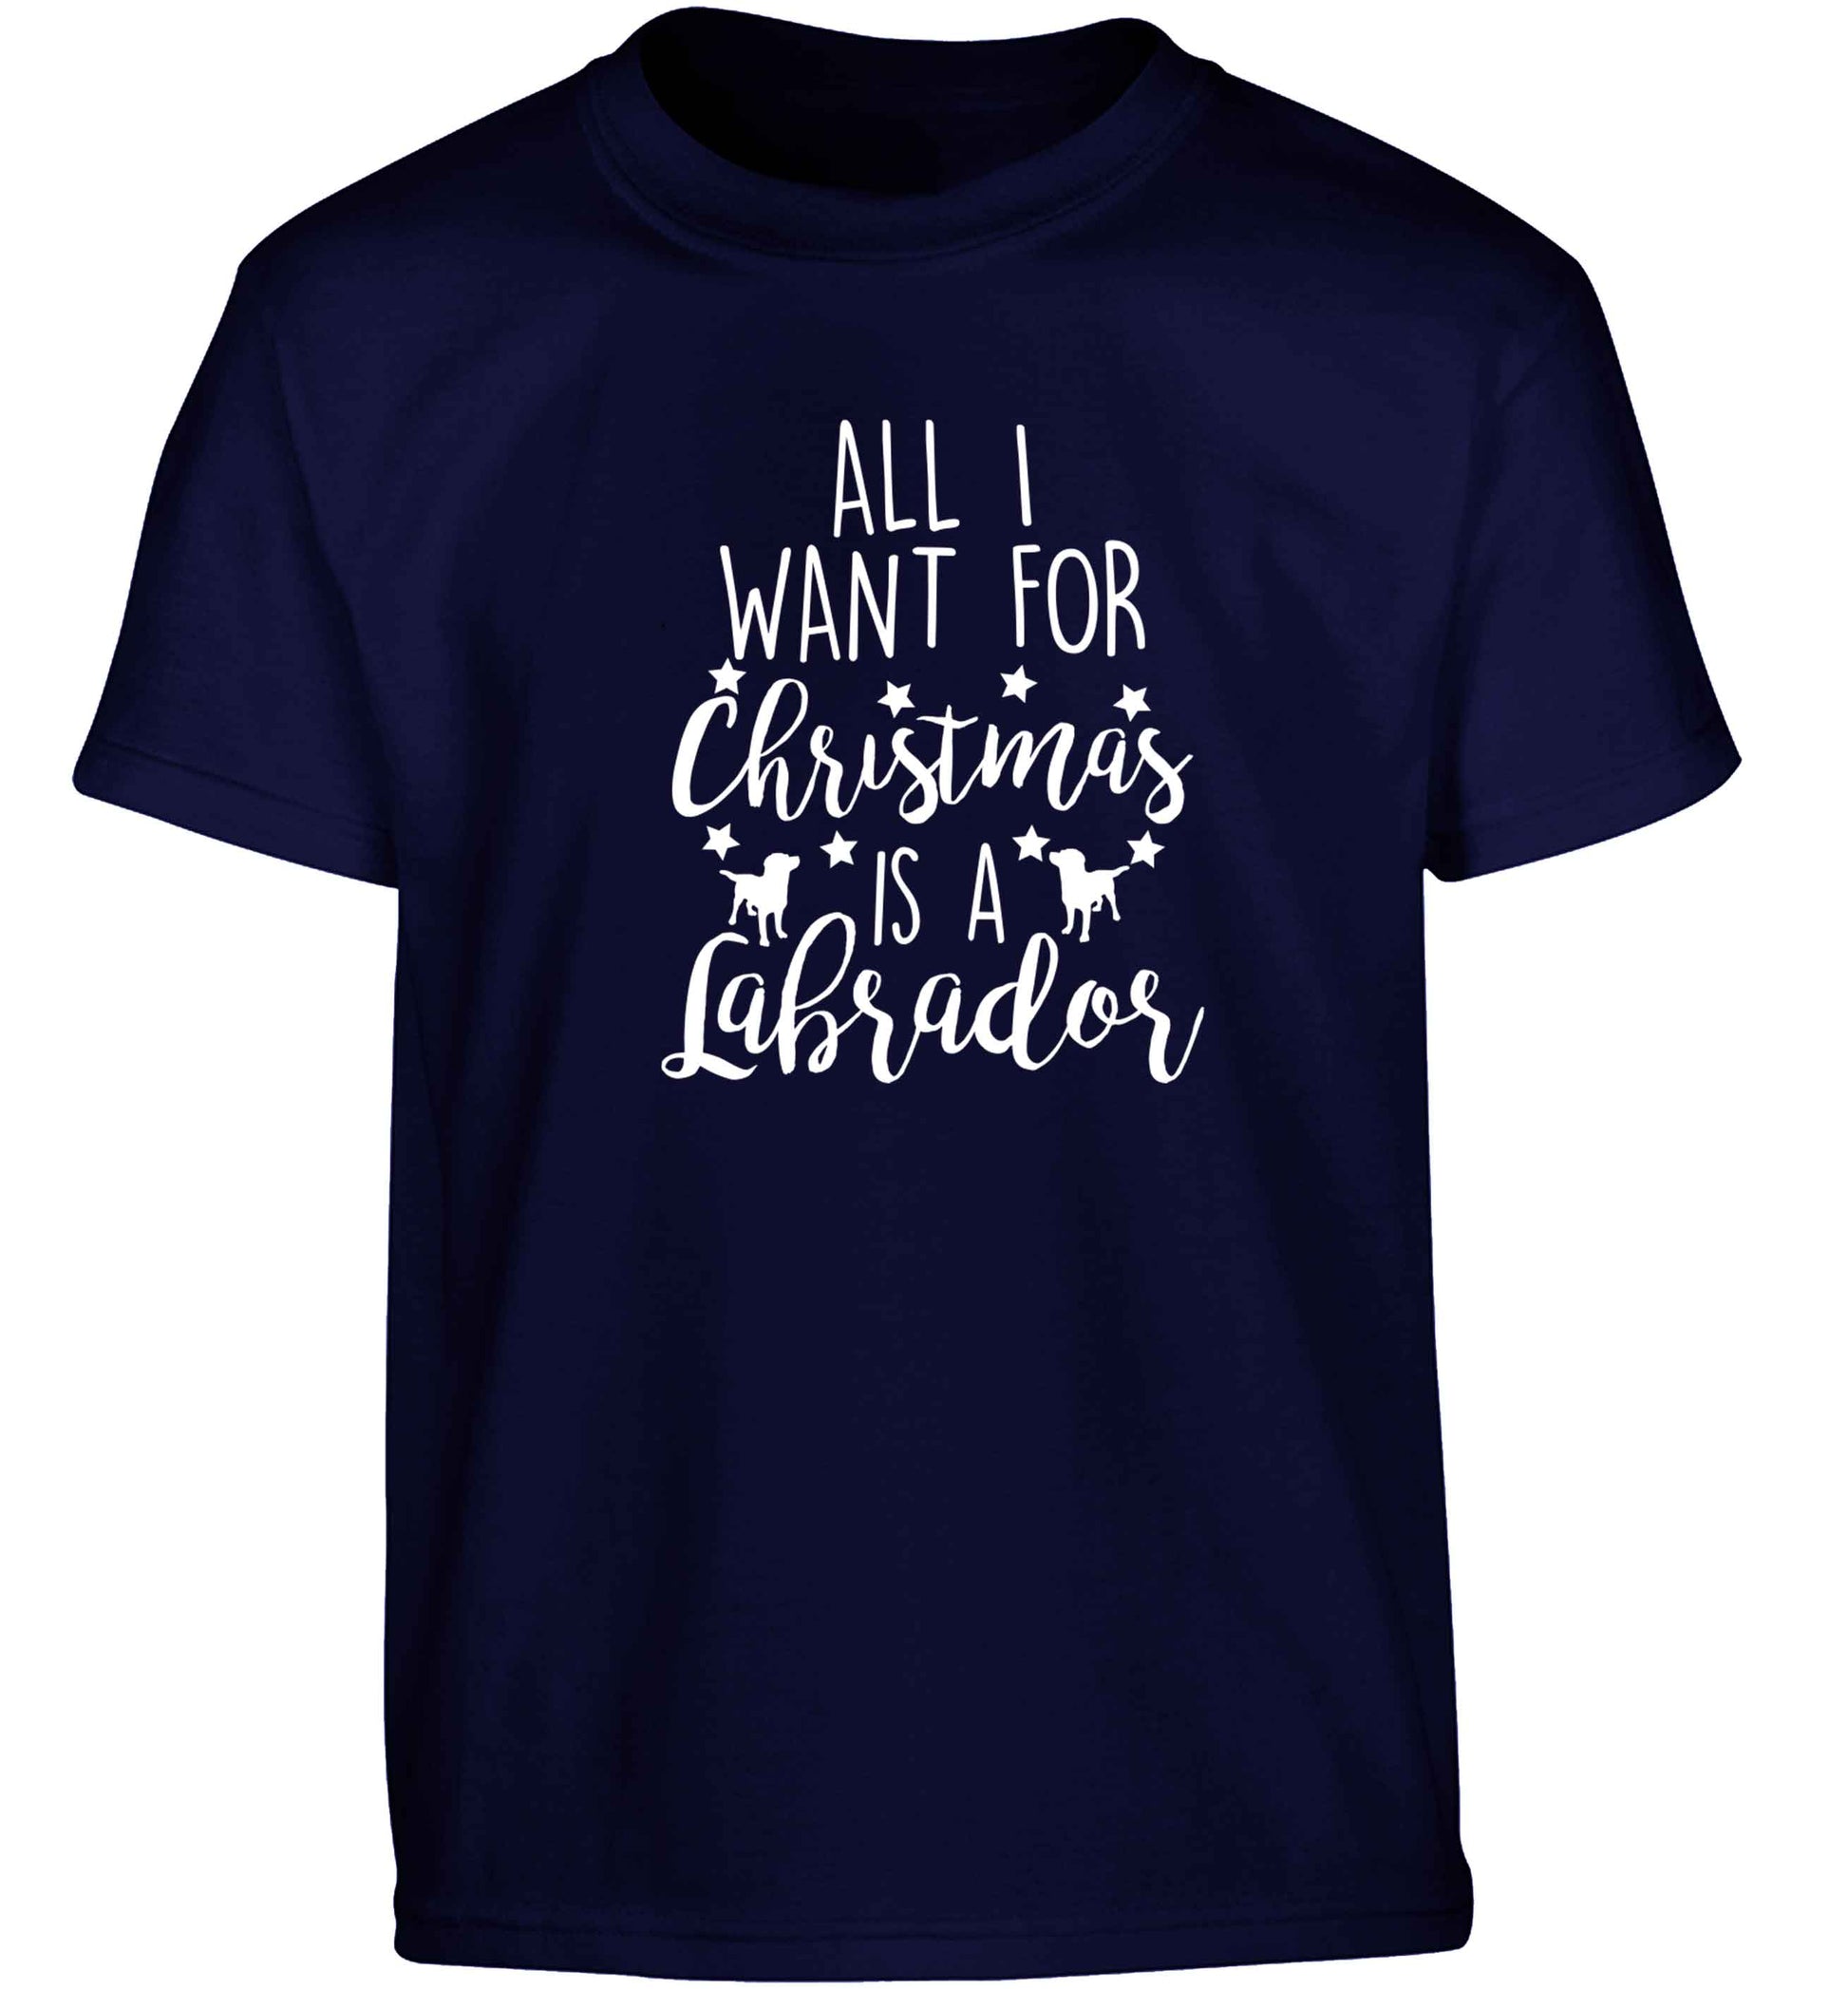 All I want for Christmas is a labrador Children's navy Tshirt 12-13 Years